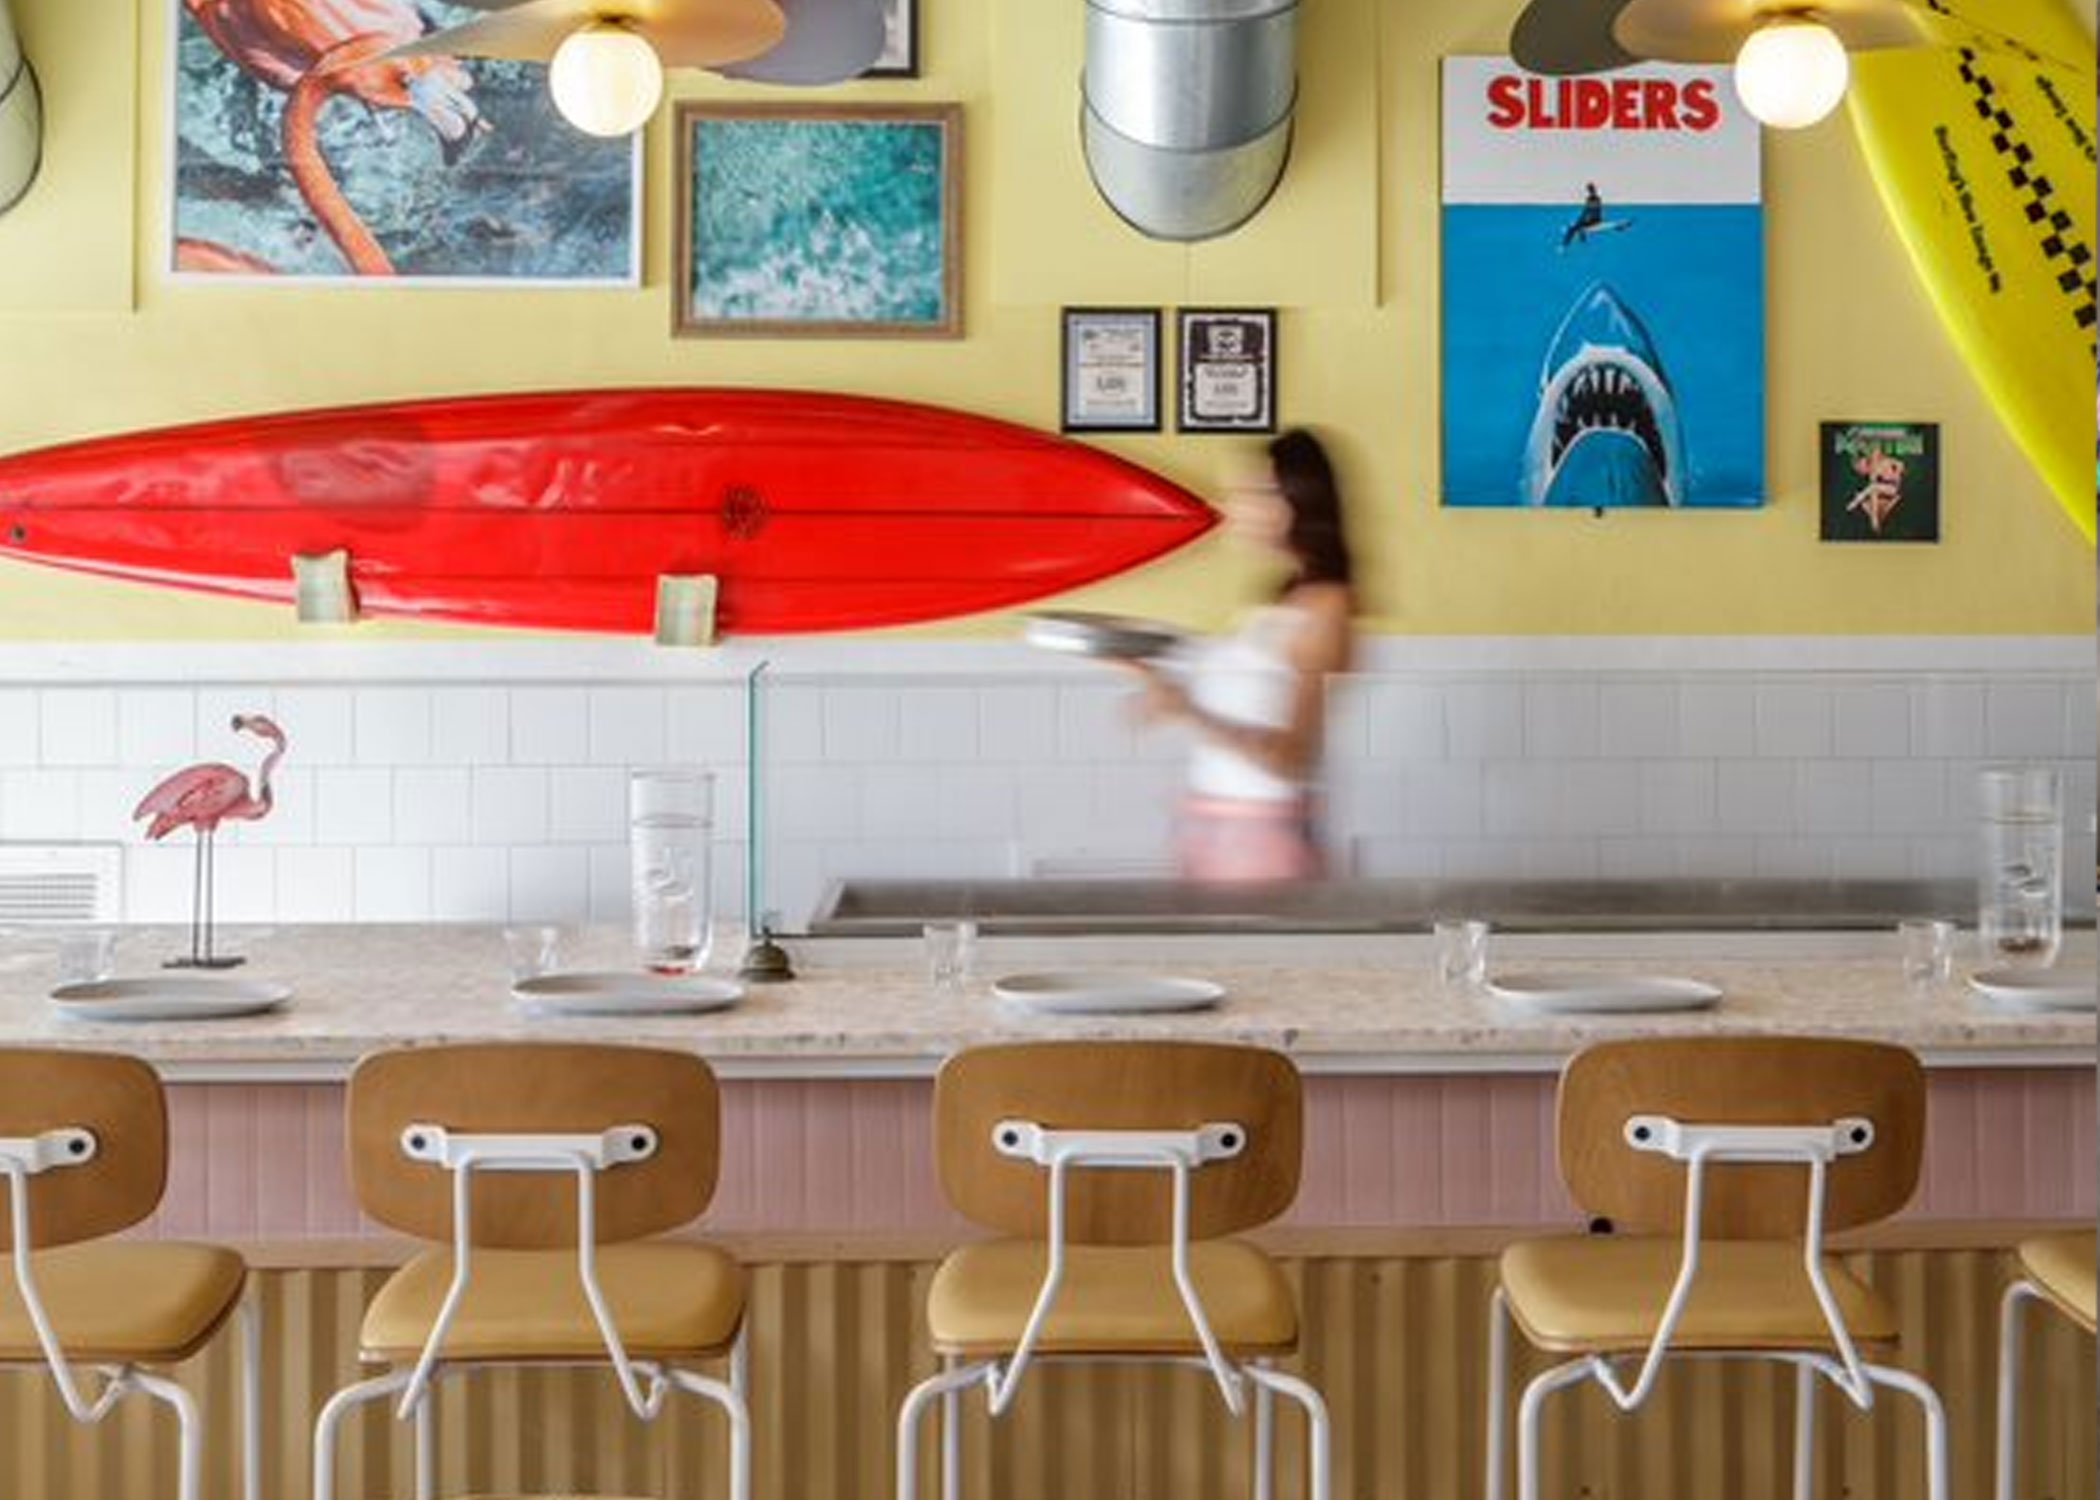 Reece barstools with tan upholstered seats, wood backs, and white steel frames line a bar set with tables. A server is passing behind it, blurred by motion. The wall is yellow with a surfboard, a fake Jaws poster with Slider's in red text and other beachy art pieces.